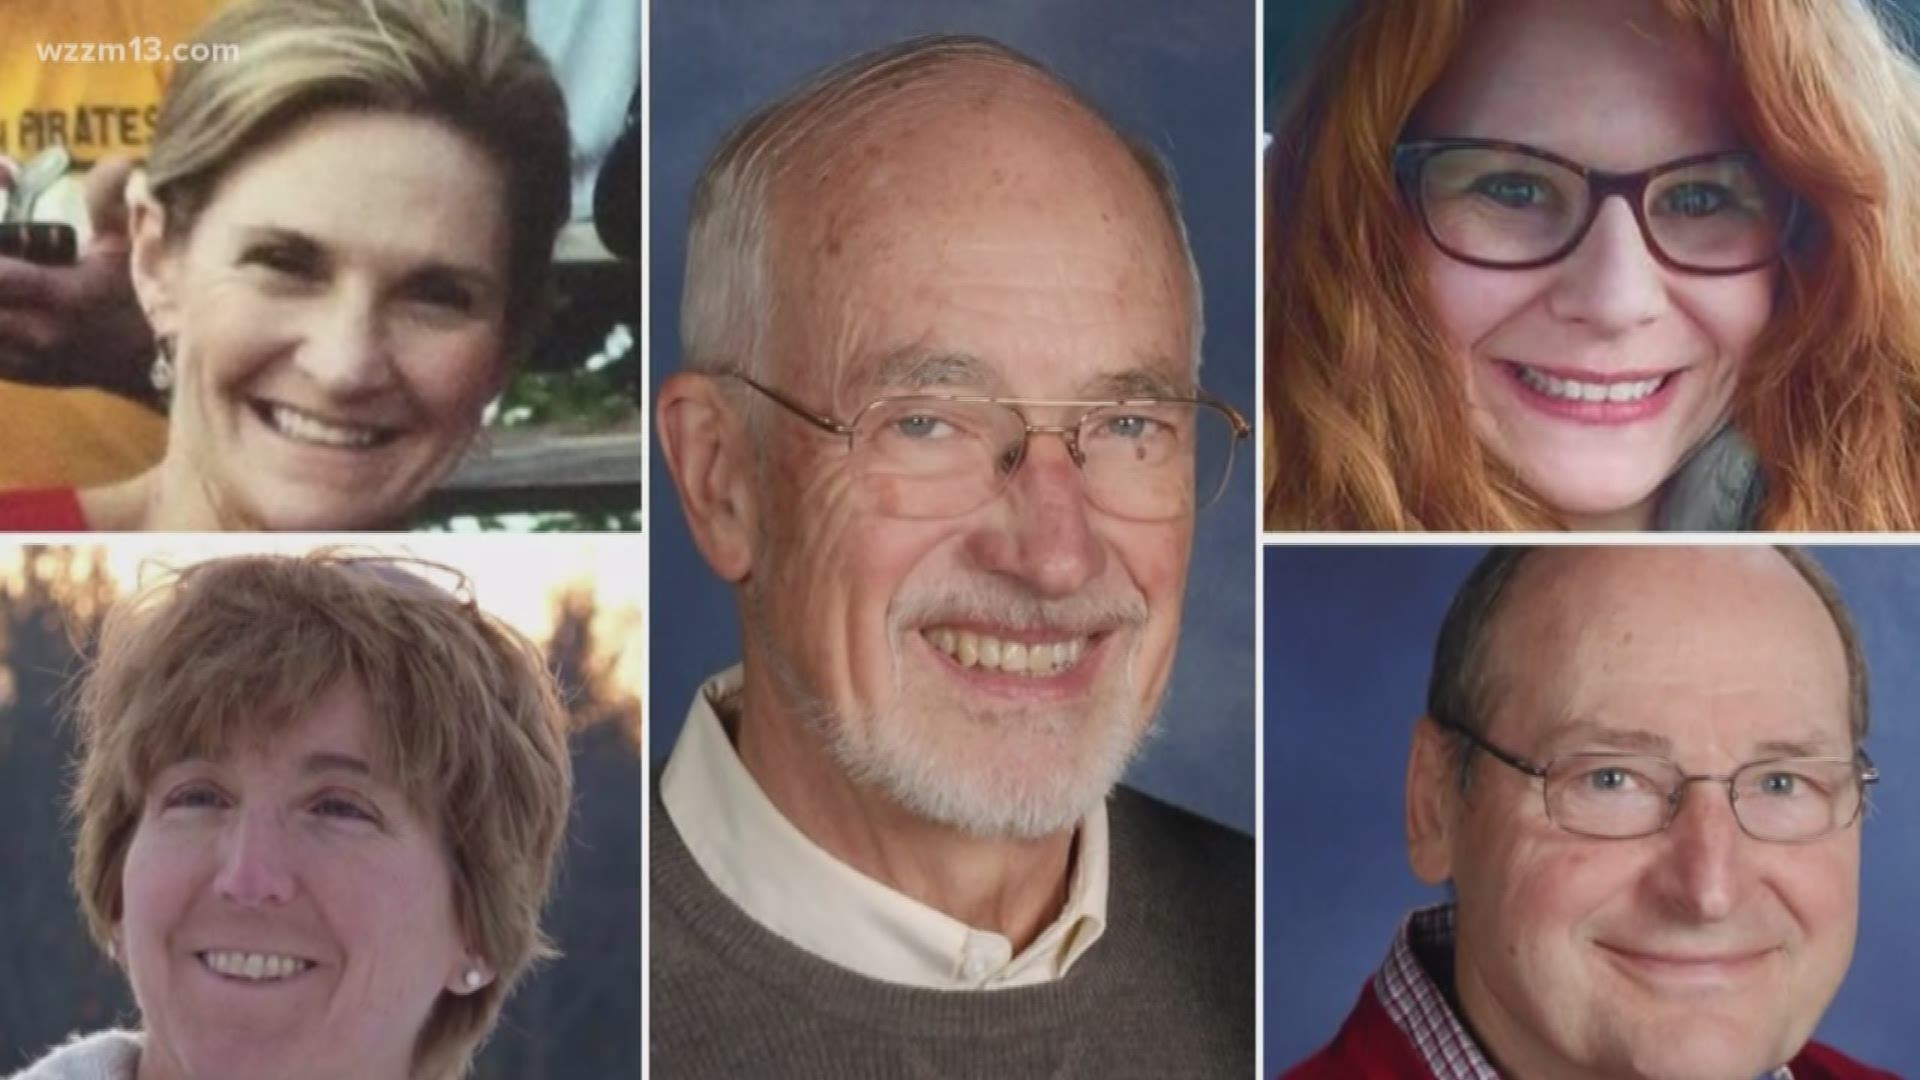 It is a solemn day for many people in the Kalamazoo community. Friday, June 7, marks three years since a deadly crash in Kalamazoo claimed the lives of five bicyclists and critically injured four others.